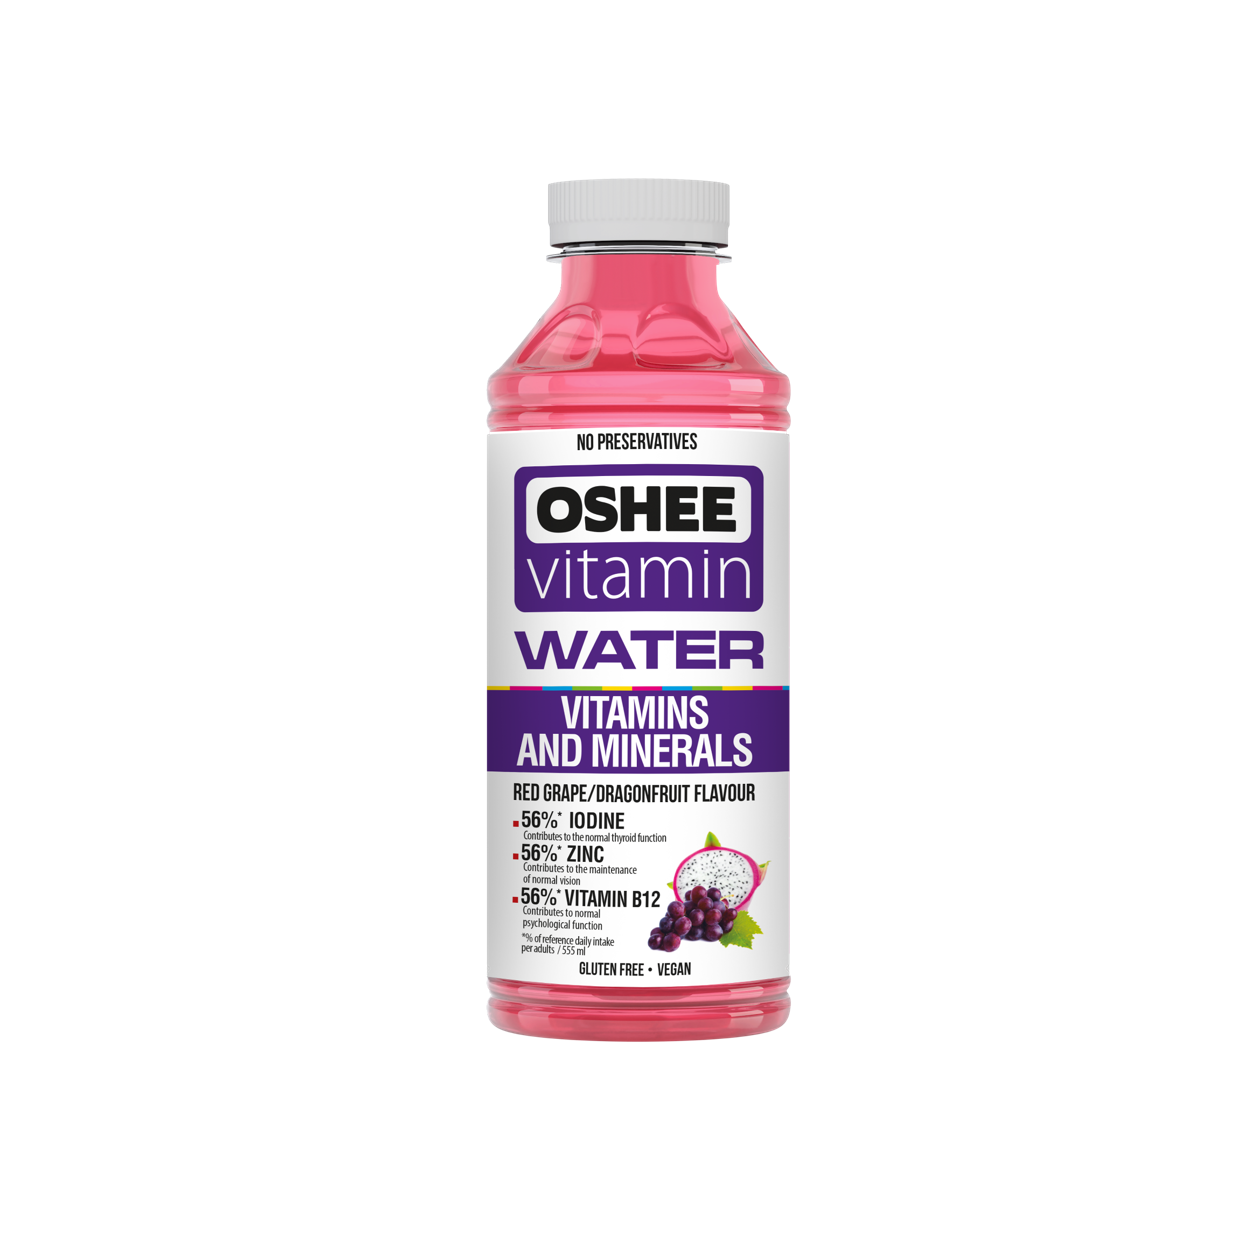 OSHEE vitamin water red grape and dragon fruit